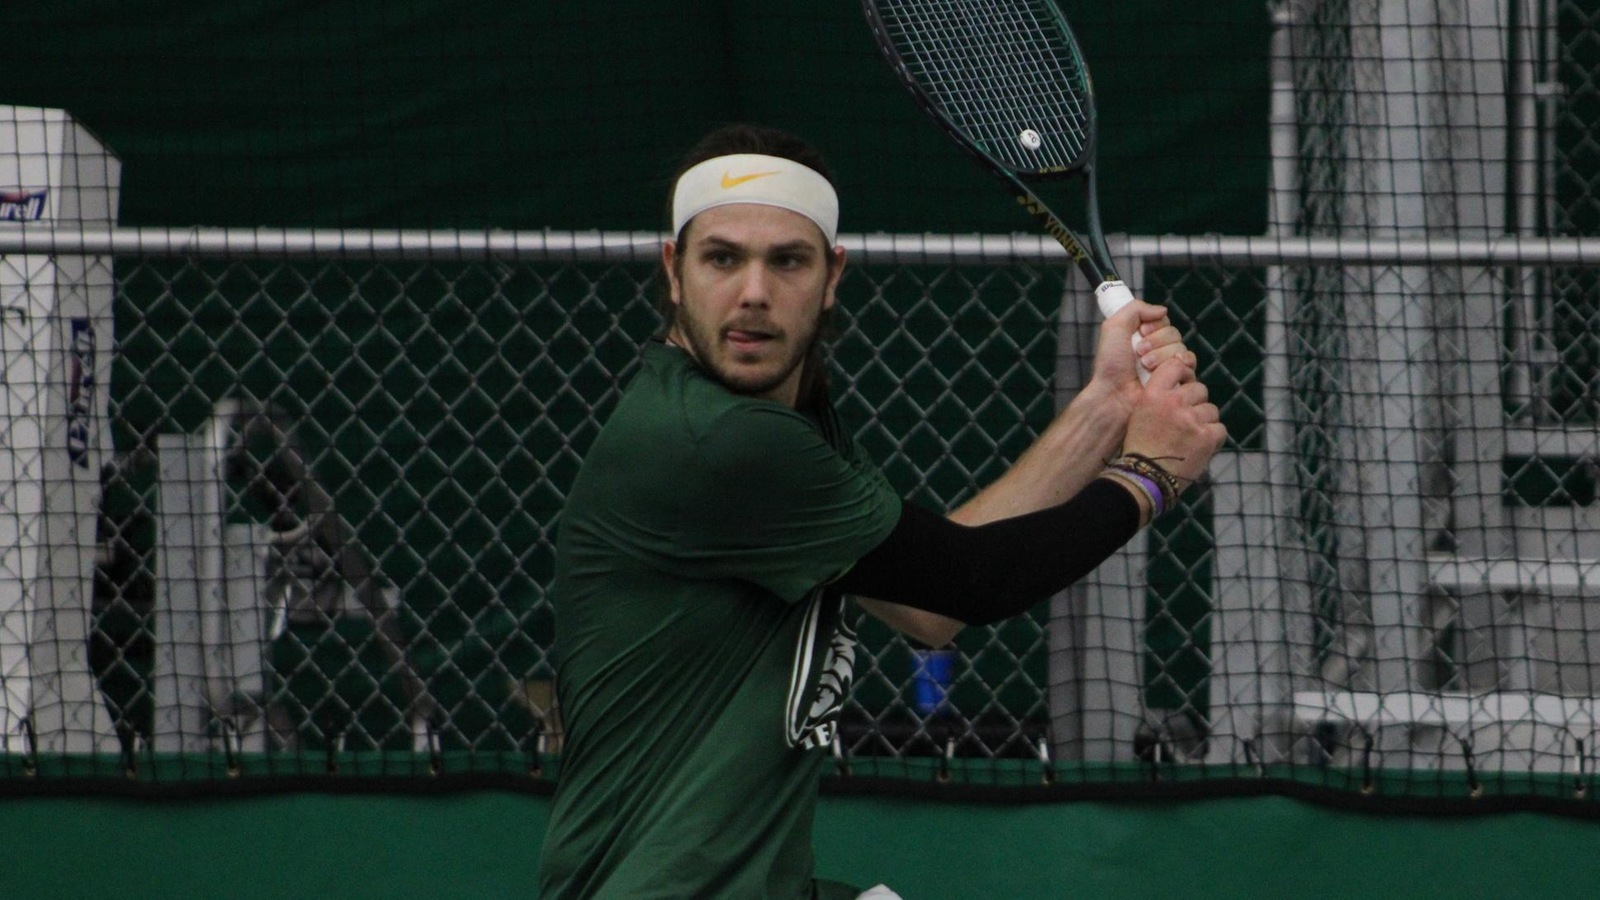 Cleveland State Men’s Tennis Set To Host YSU With Share Of #HLTennis Regular Season Title On The Line